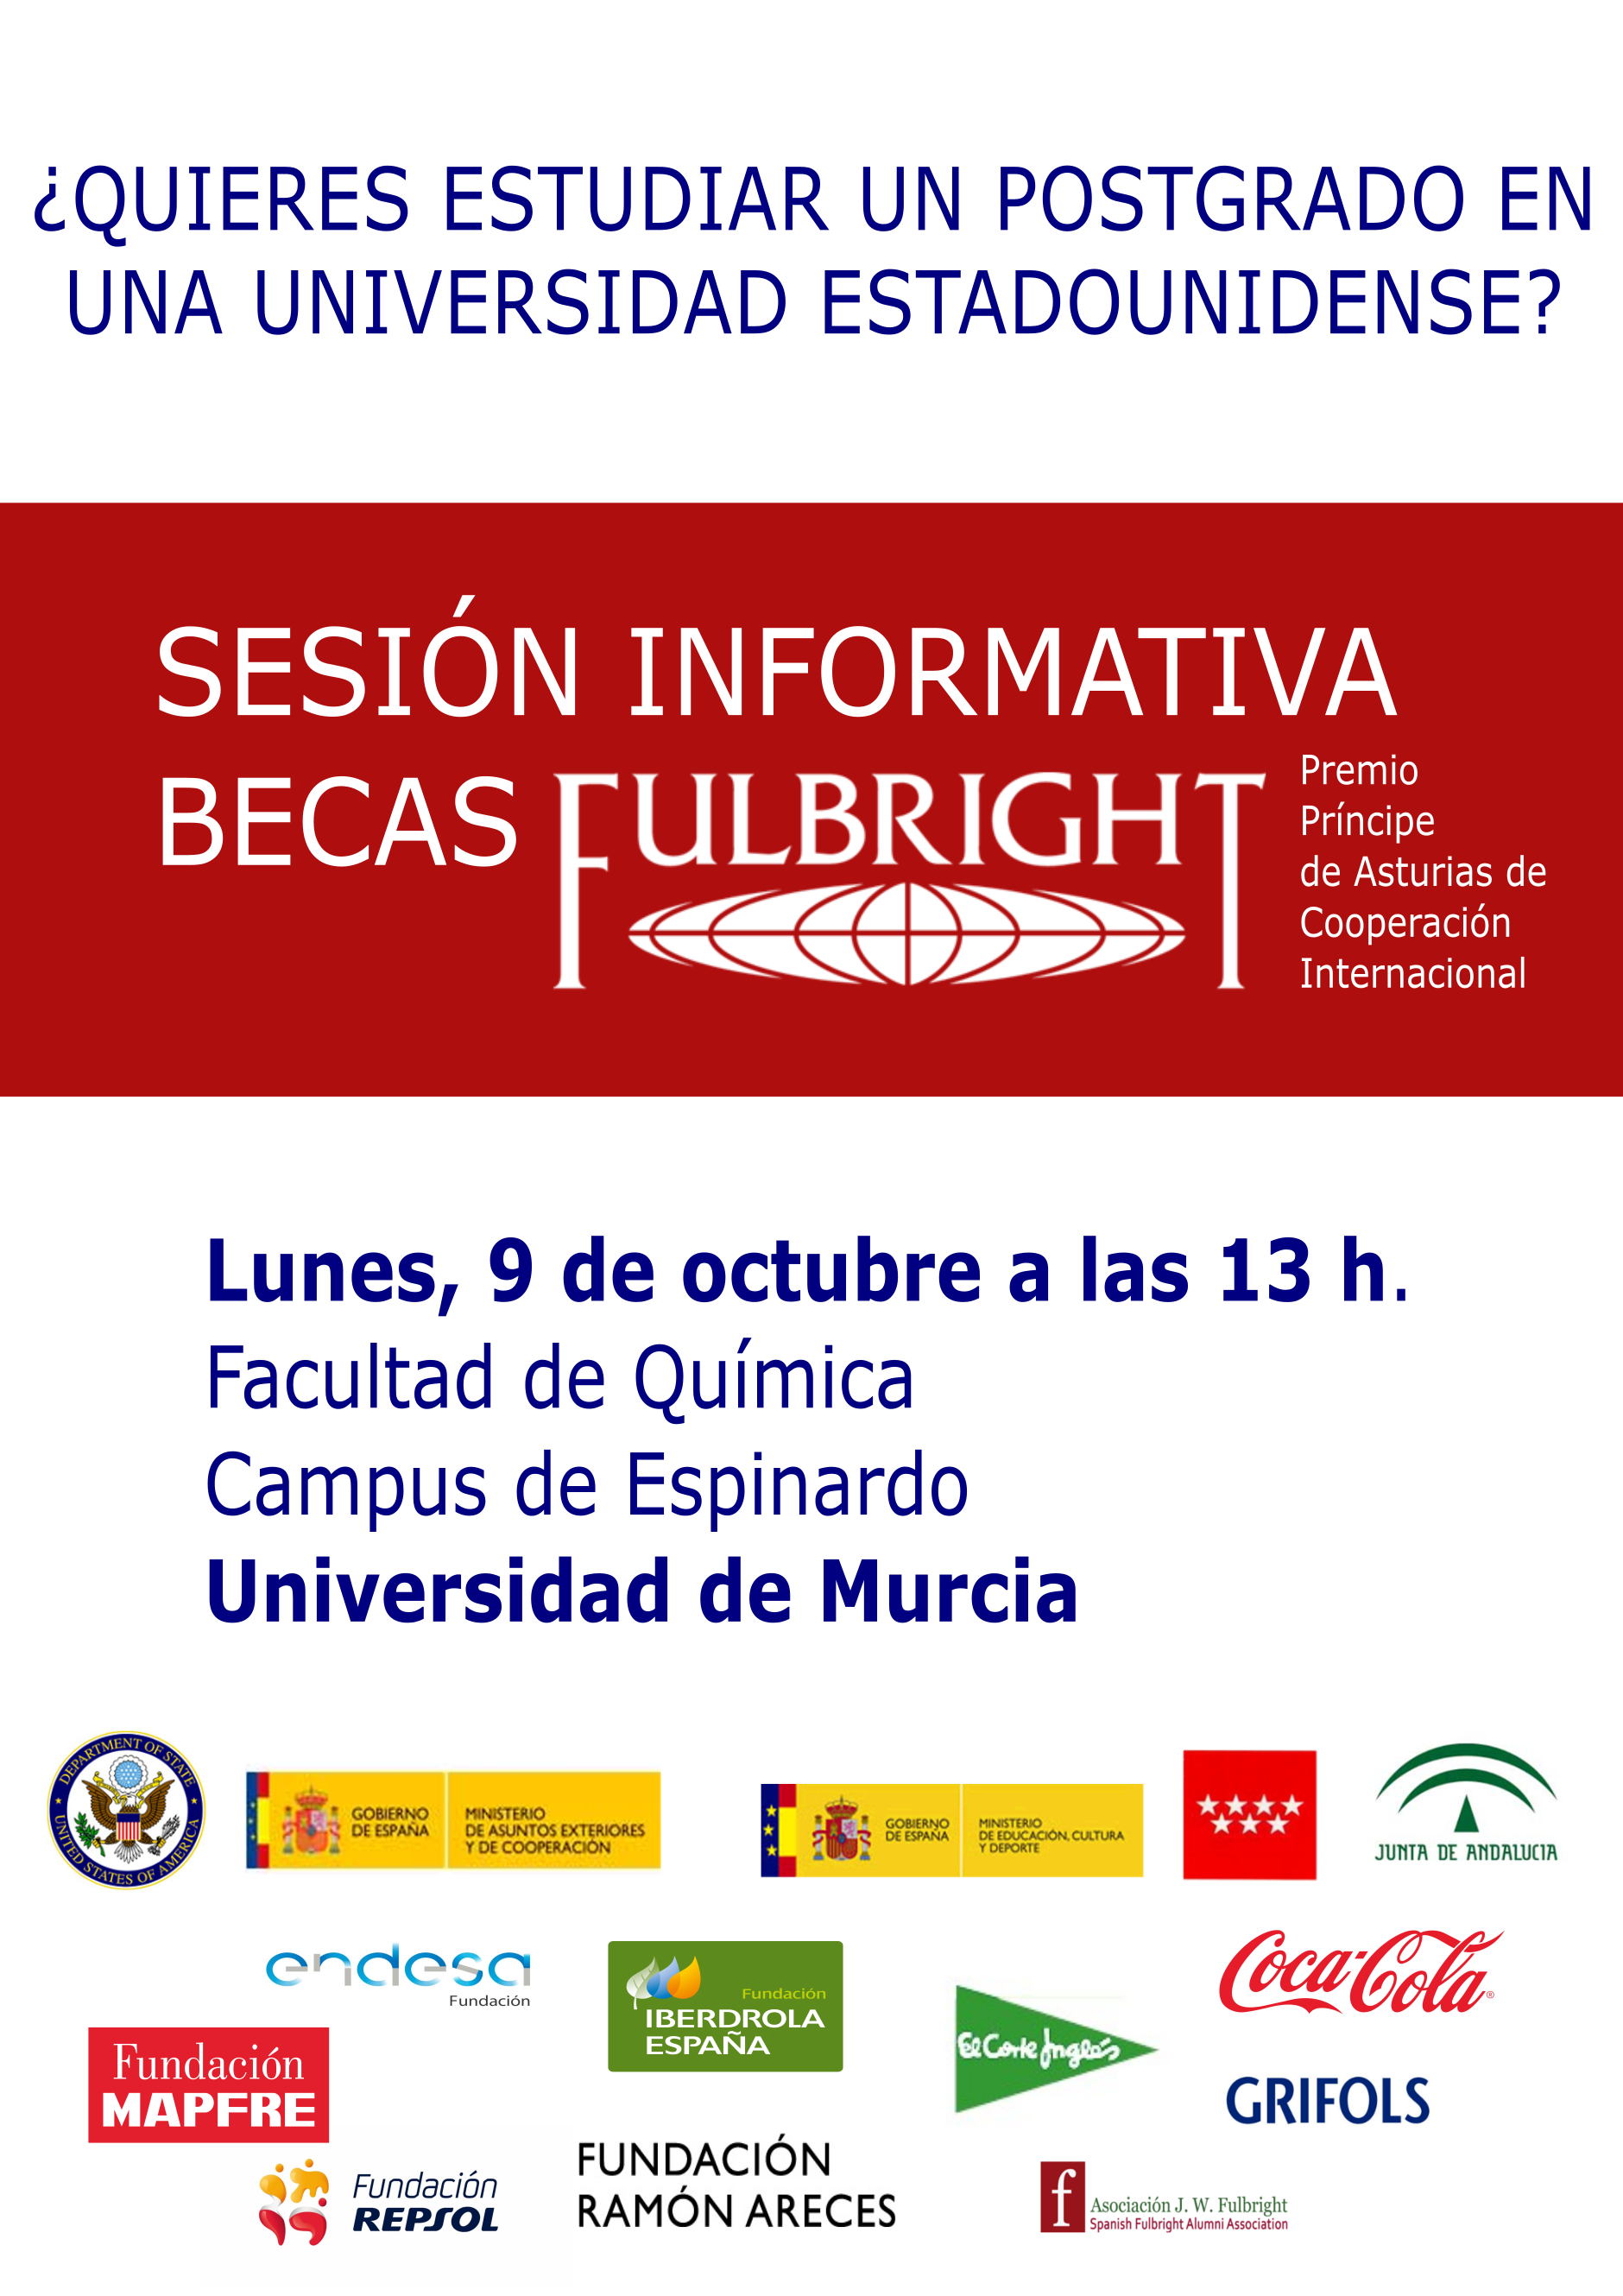 Fulbright Quimica